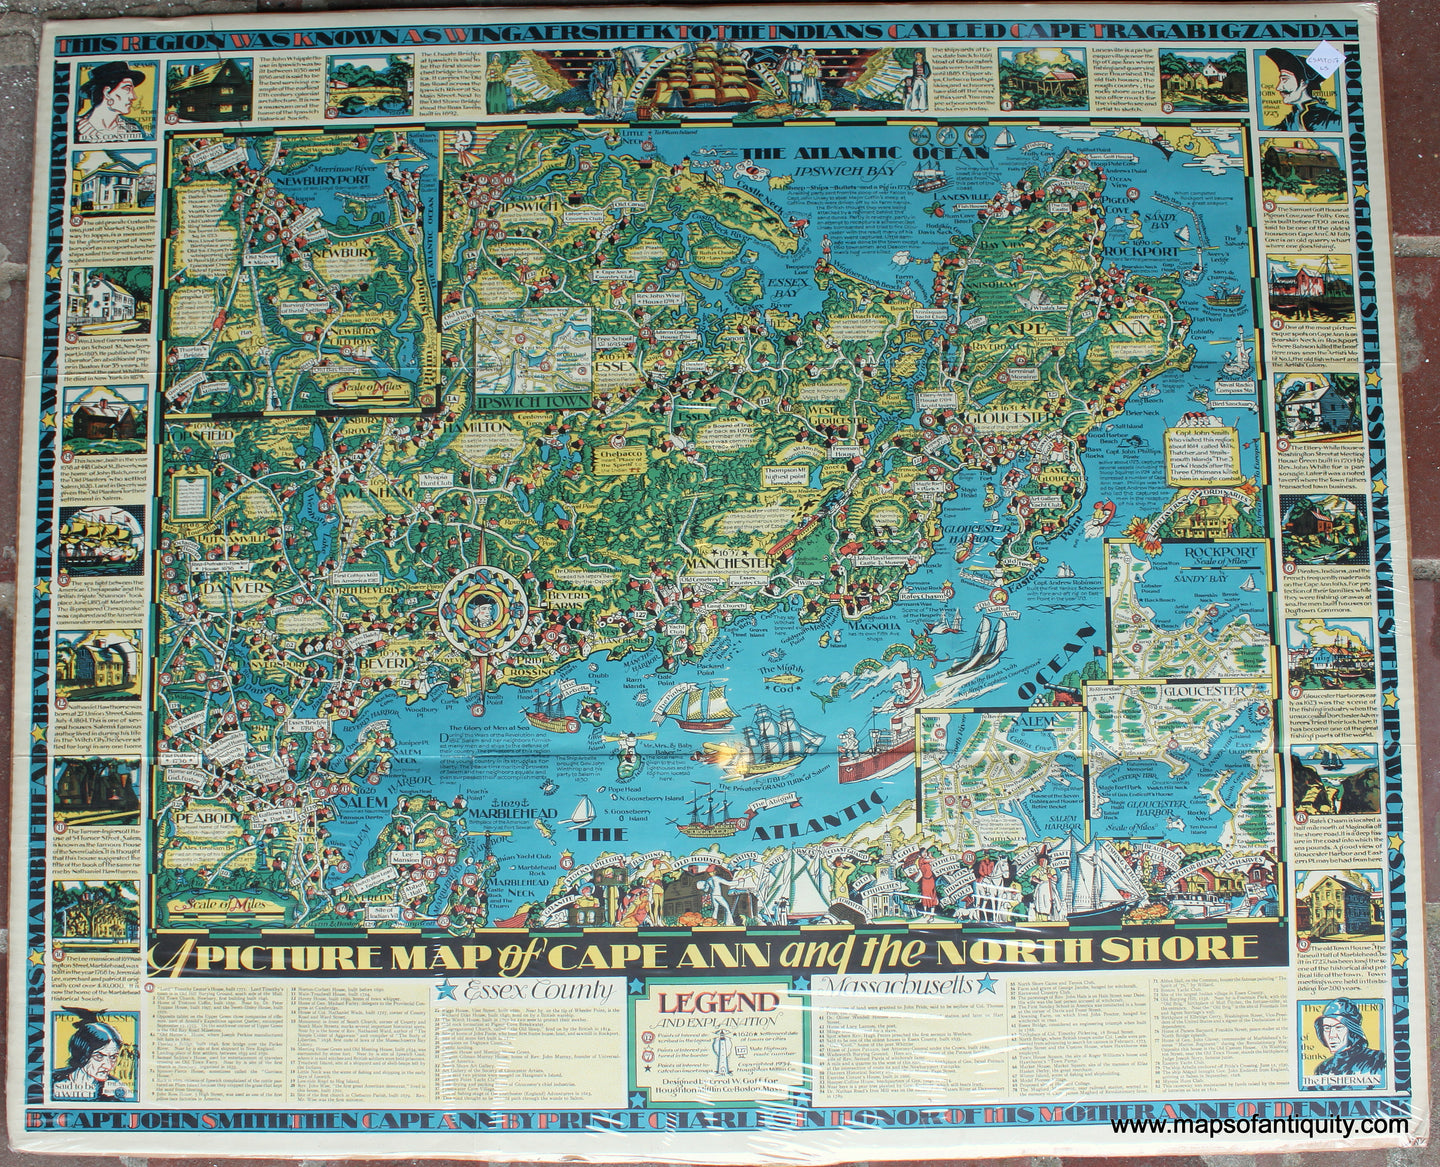 Antique-Map-Pictorial-A-Picture-Map-of-Cape-Ann-and-the-North-Shore-1934-Erroll-GoffMaps-of-Antiquity